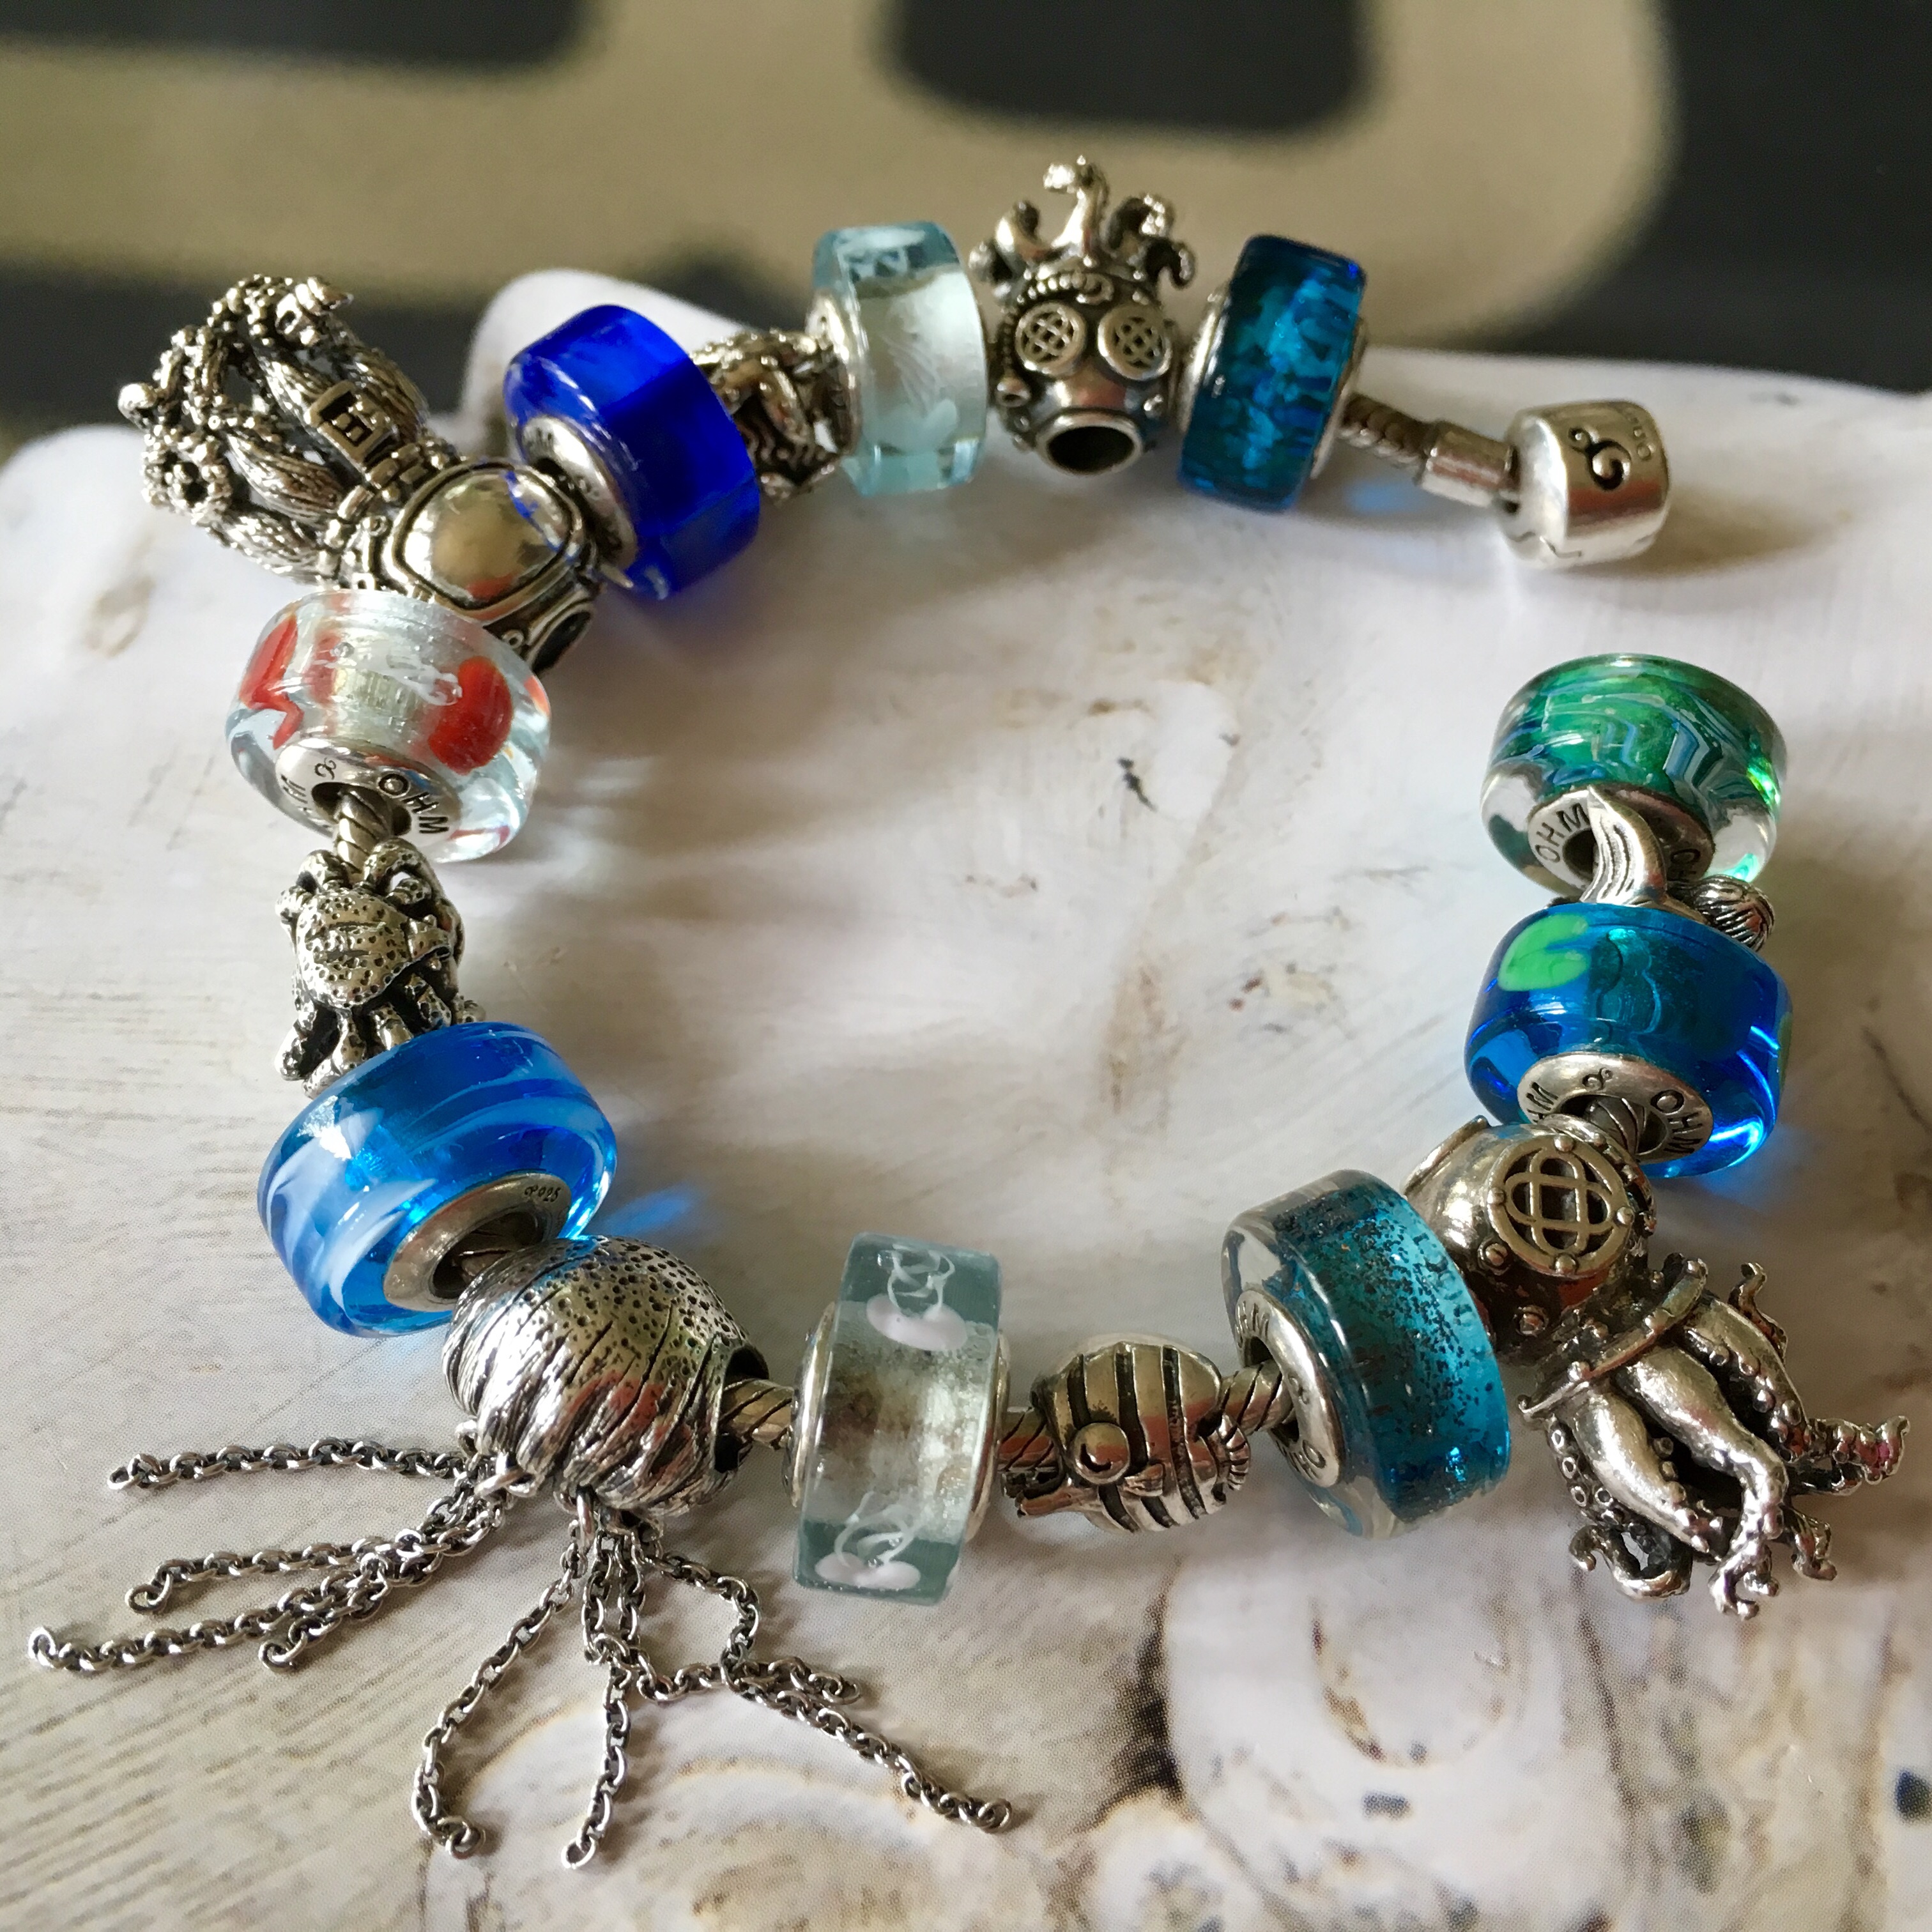 OHM (Jelly)fish Stories – Trudy's charms 'n beads